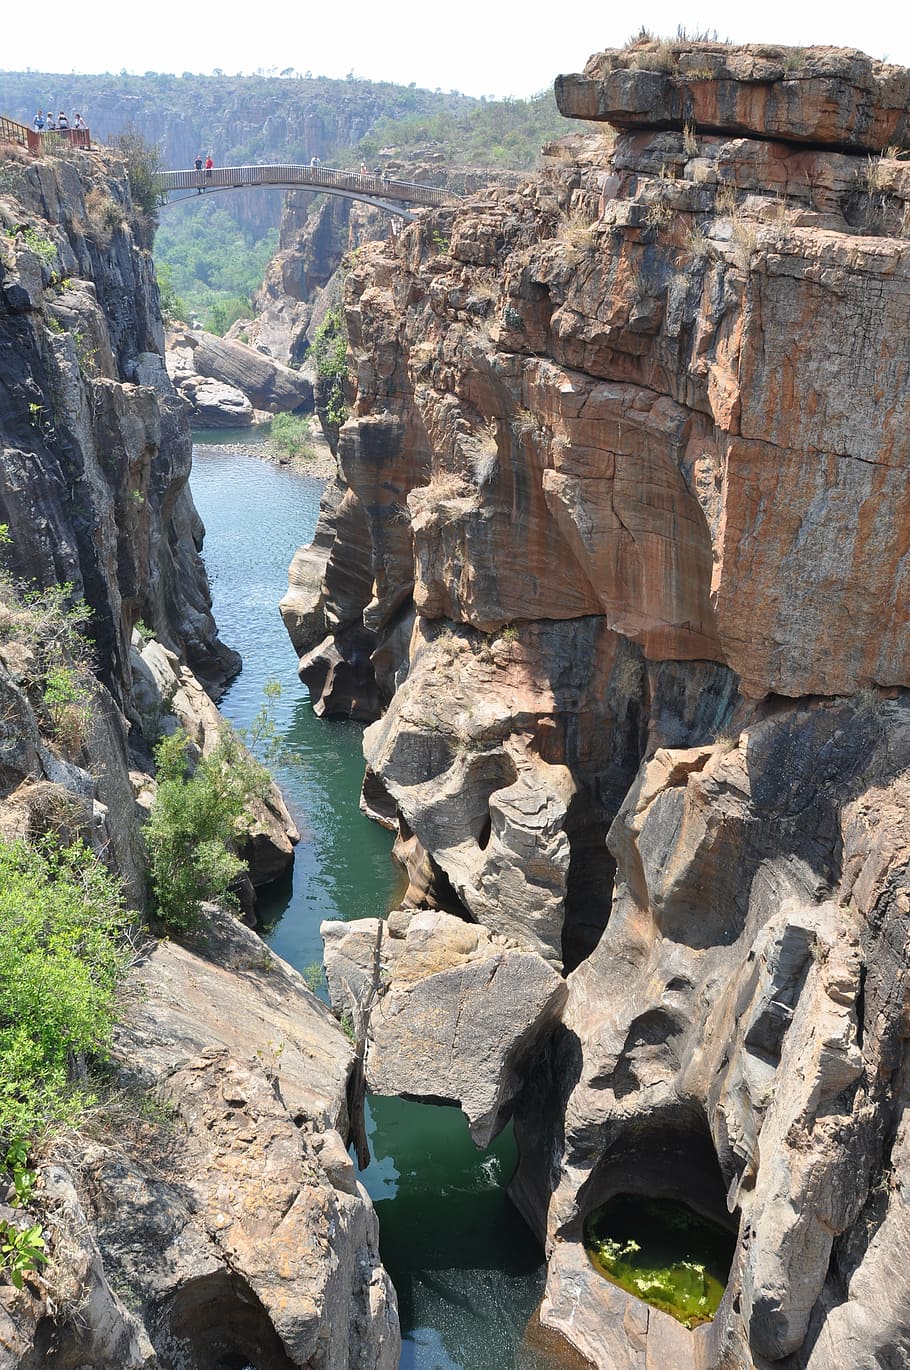 south africa, weeping river, blyde river canyon, nature, rock - Object, cliff, landscape, scenics, canyon, famous Place